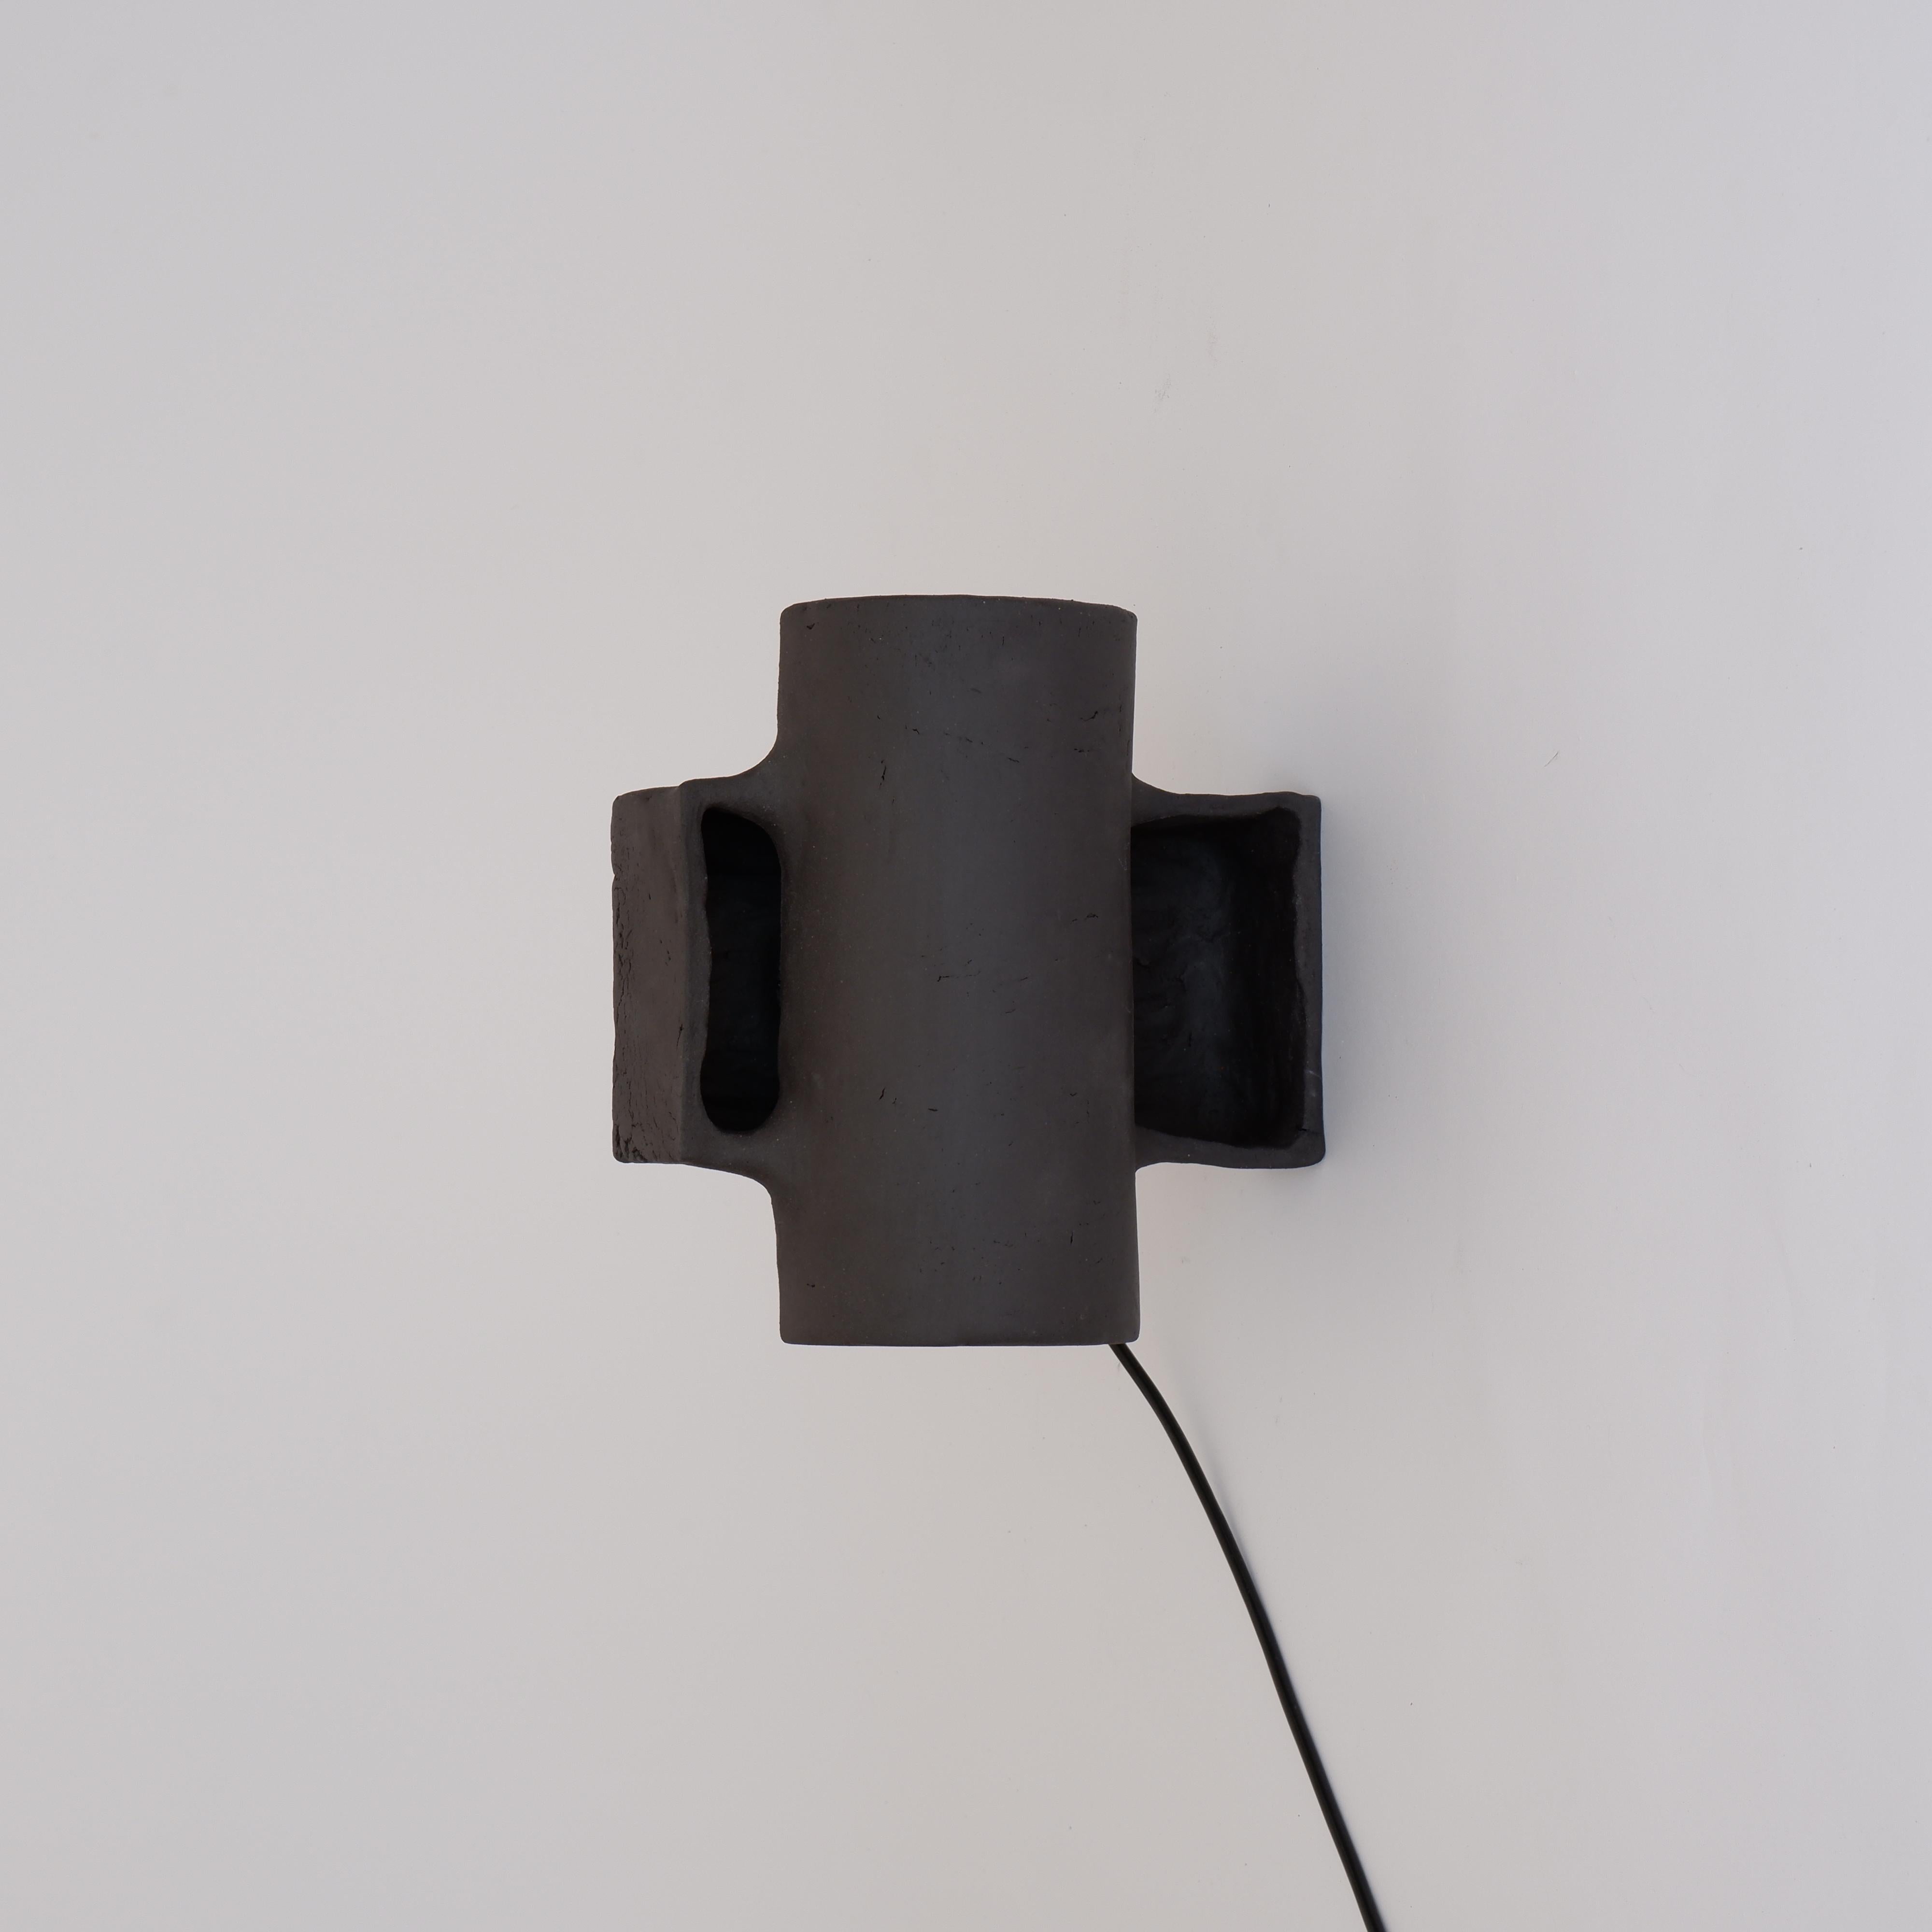 Set Of 2 Accre Small Lamps by Ia Kutateladze
One Of A Kind.
Dimensions: D 20 x W 23 x H 22 cm (each).
Materials: Clay.

Each piece is one of a kind, due to its free hand-building process. Different color variations available: raw black clay, raw